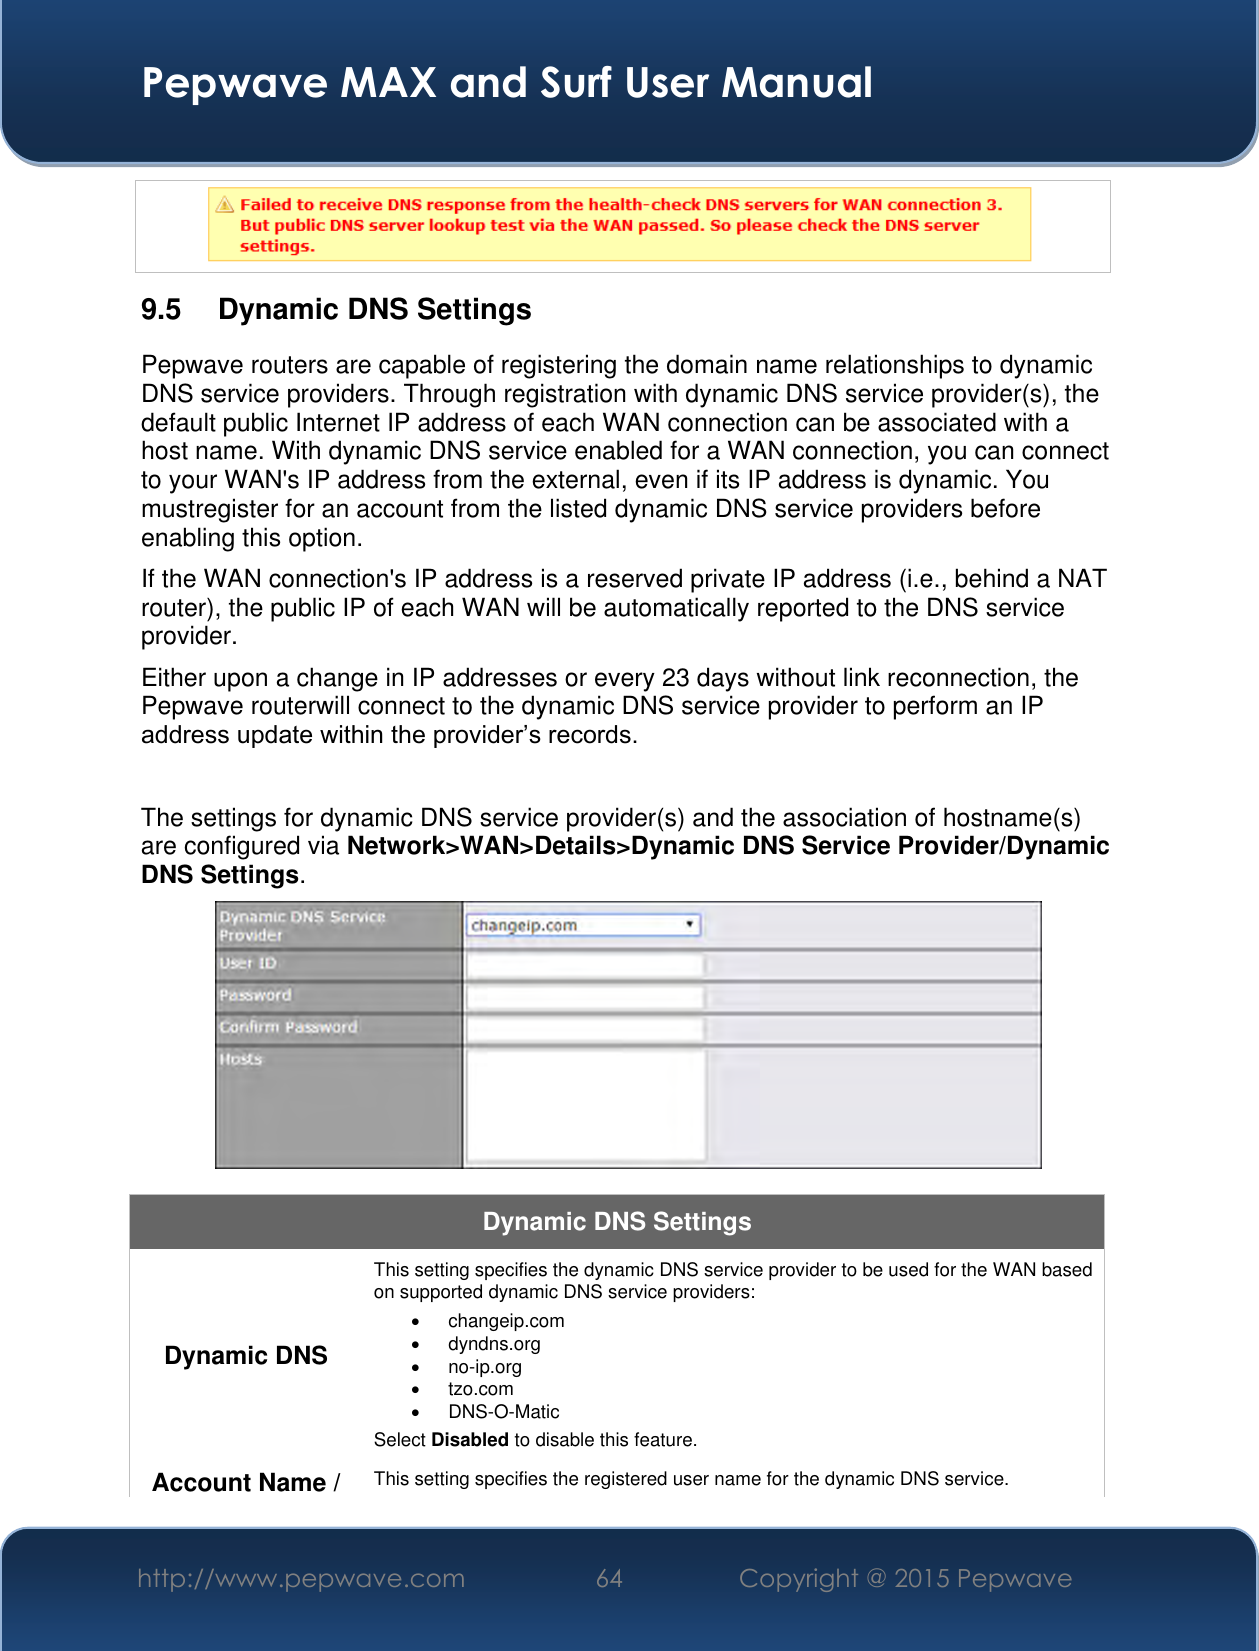  Pepwave MAX and Surf User Manual http://www.pepwave.com 64 Copyright @ 2015 Pepwave    9.5  Dynamic DNS Settings Pepwave routers are capable of registering the domain name relationships to dynamic DNS service providers. Through registration with dynamic DNS service provider(s), the default public Internet IP address of each WAN connection can be associated with a host name. With dynamic DNS service enabled for a WAN connection, you can connect to your WAN&apos;s IP address from the external, even if its IP address is dynamic. You mustregister for an account from the listed dynamic DNS service providers before enabling this option. If the WAN connection&apos;s IP address is a reserved private IP address (i.e., behind a NAT router), the public IP of each WAN will be automatically reported to the DNS service provider. Either upon a change in IP addresses or every 23 days without link reconnection, the Pepwave routerwill connect to the dynamic DNS service provider to perform an IP address update within the provider’s records.  The settings for dynamic DNS service provider(s) and the association of hostname(s) are configured via Network&gt;WAN&gt;Details&gt;Dynamic DNS Service Provider/Dynamic DNS Settings.  Dynamic DNS Settings Dynamic DNS This setting specifies the dynamic DNS service provider to be used for the WAN based on supported dynamic DNS service providers:   changeip.com   dyndns.org  no-ip.org   tzo.com  DNS-O-Matic Select Disabled to disable this feature. Account Name / This setting specifies the registered user name for the dynamic DNS service. 